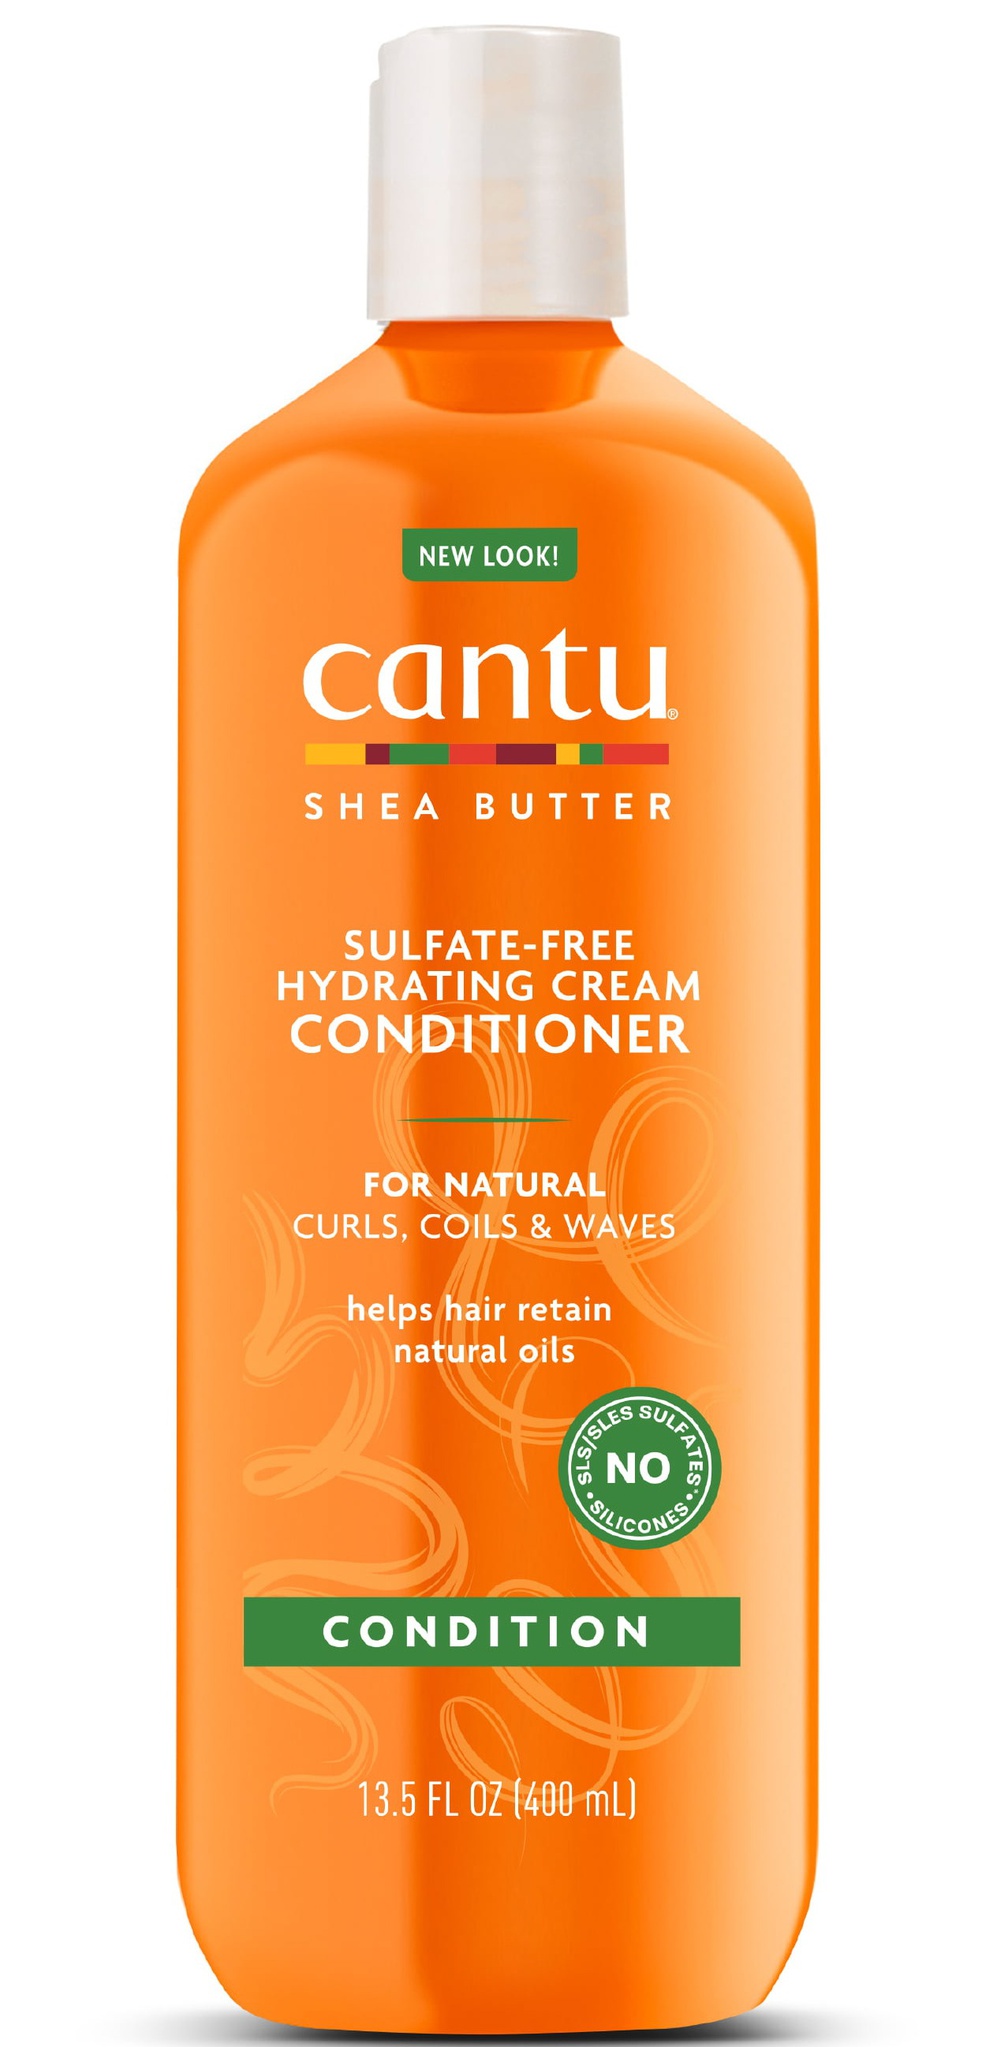 Cantu Shea Butter For Natural Hair Sulfate-free Hydrating Cream Conditioner